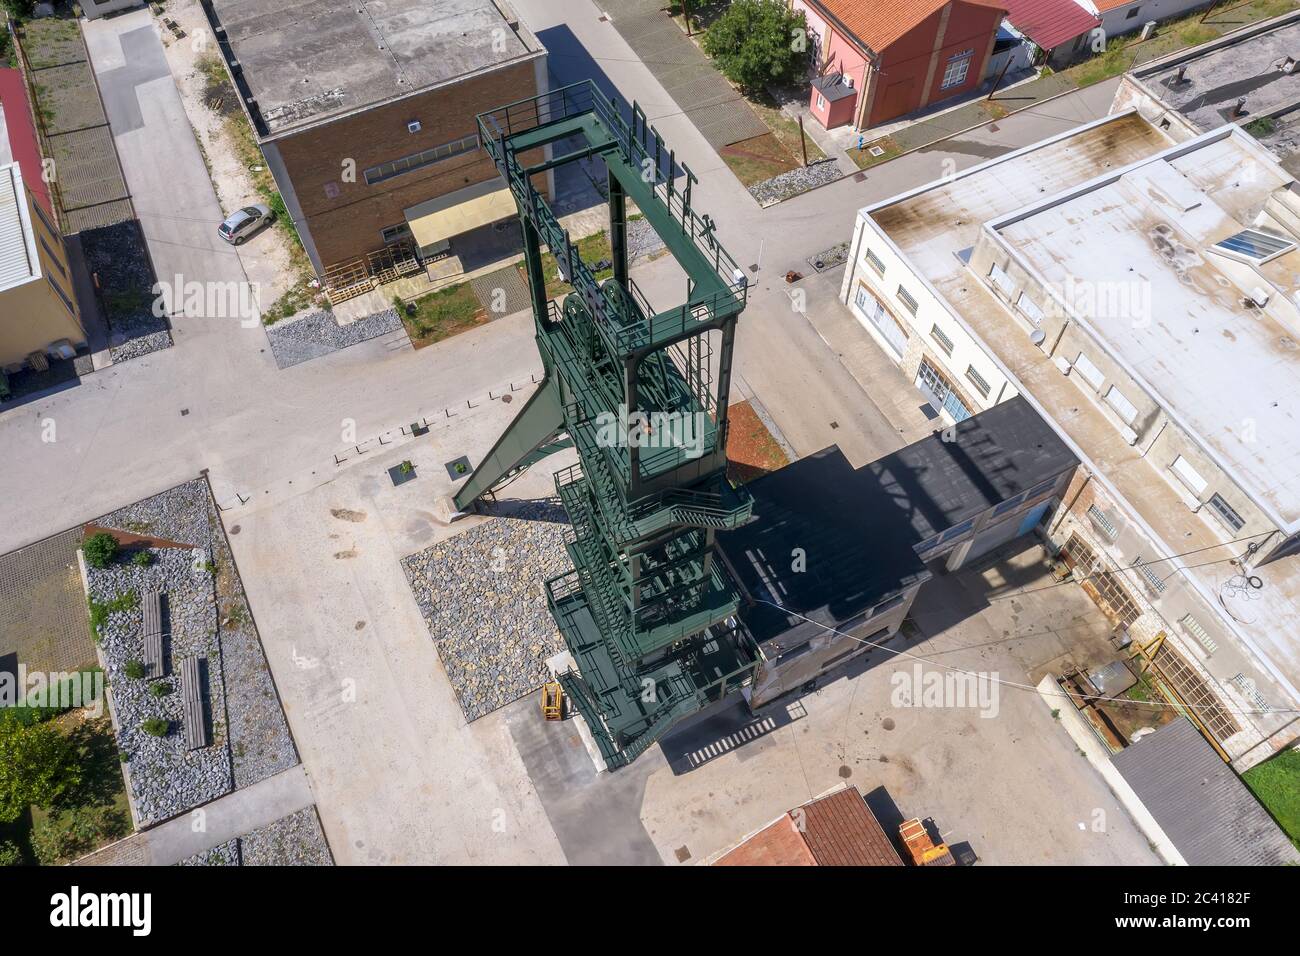 LABIN, CROATIA - JUNY 6, 2020: Renovated old mining tower called Šoht built 1938, aerial  view Stock Photo